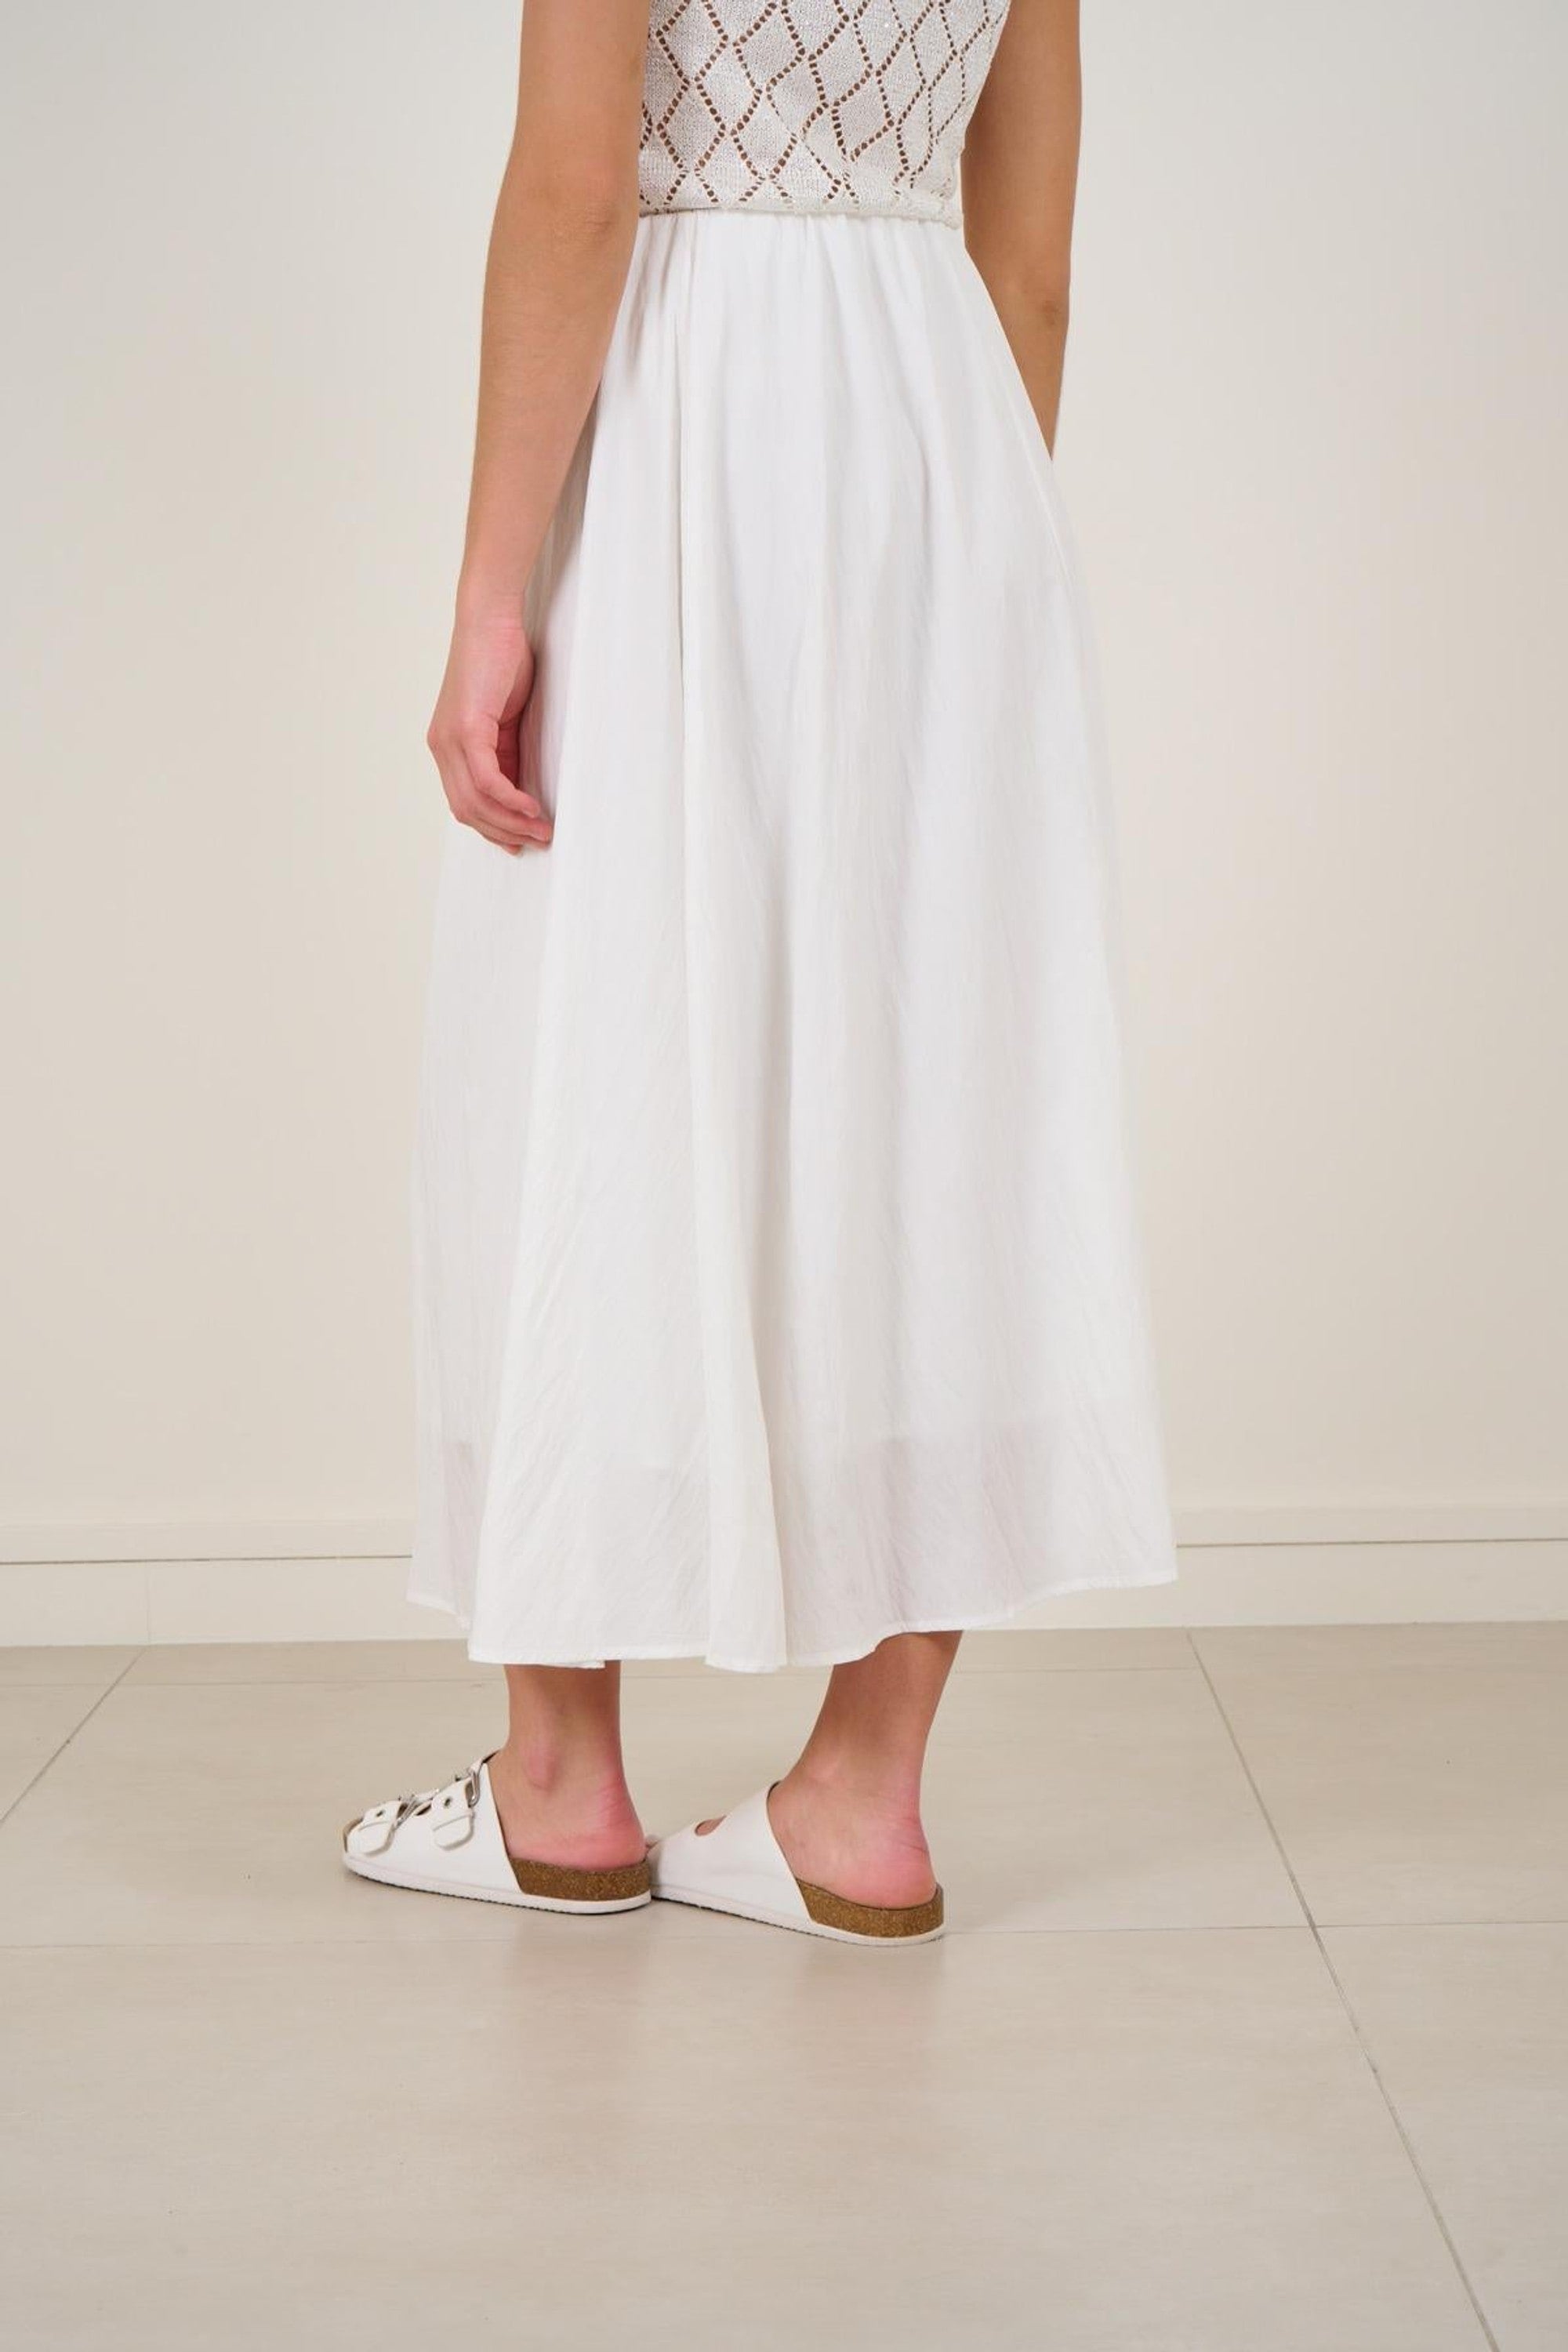 Clever Alice Isabel Skirt in White